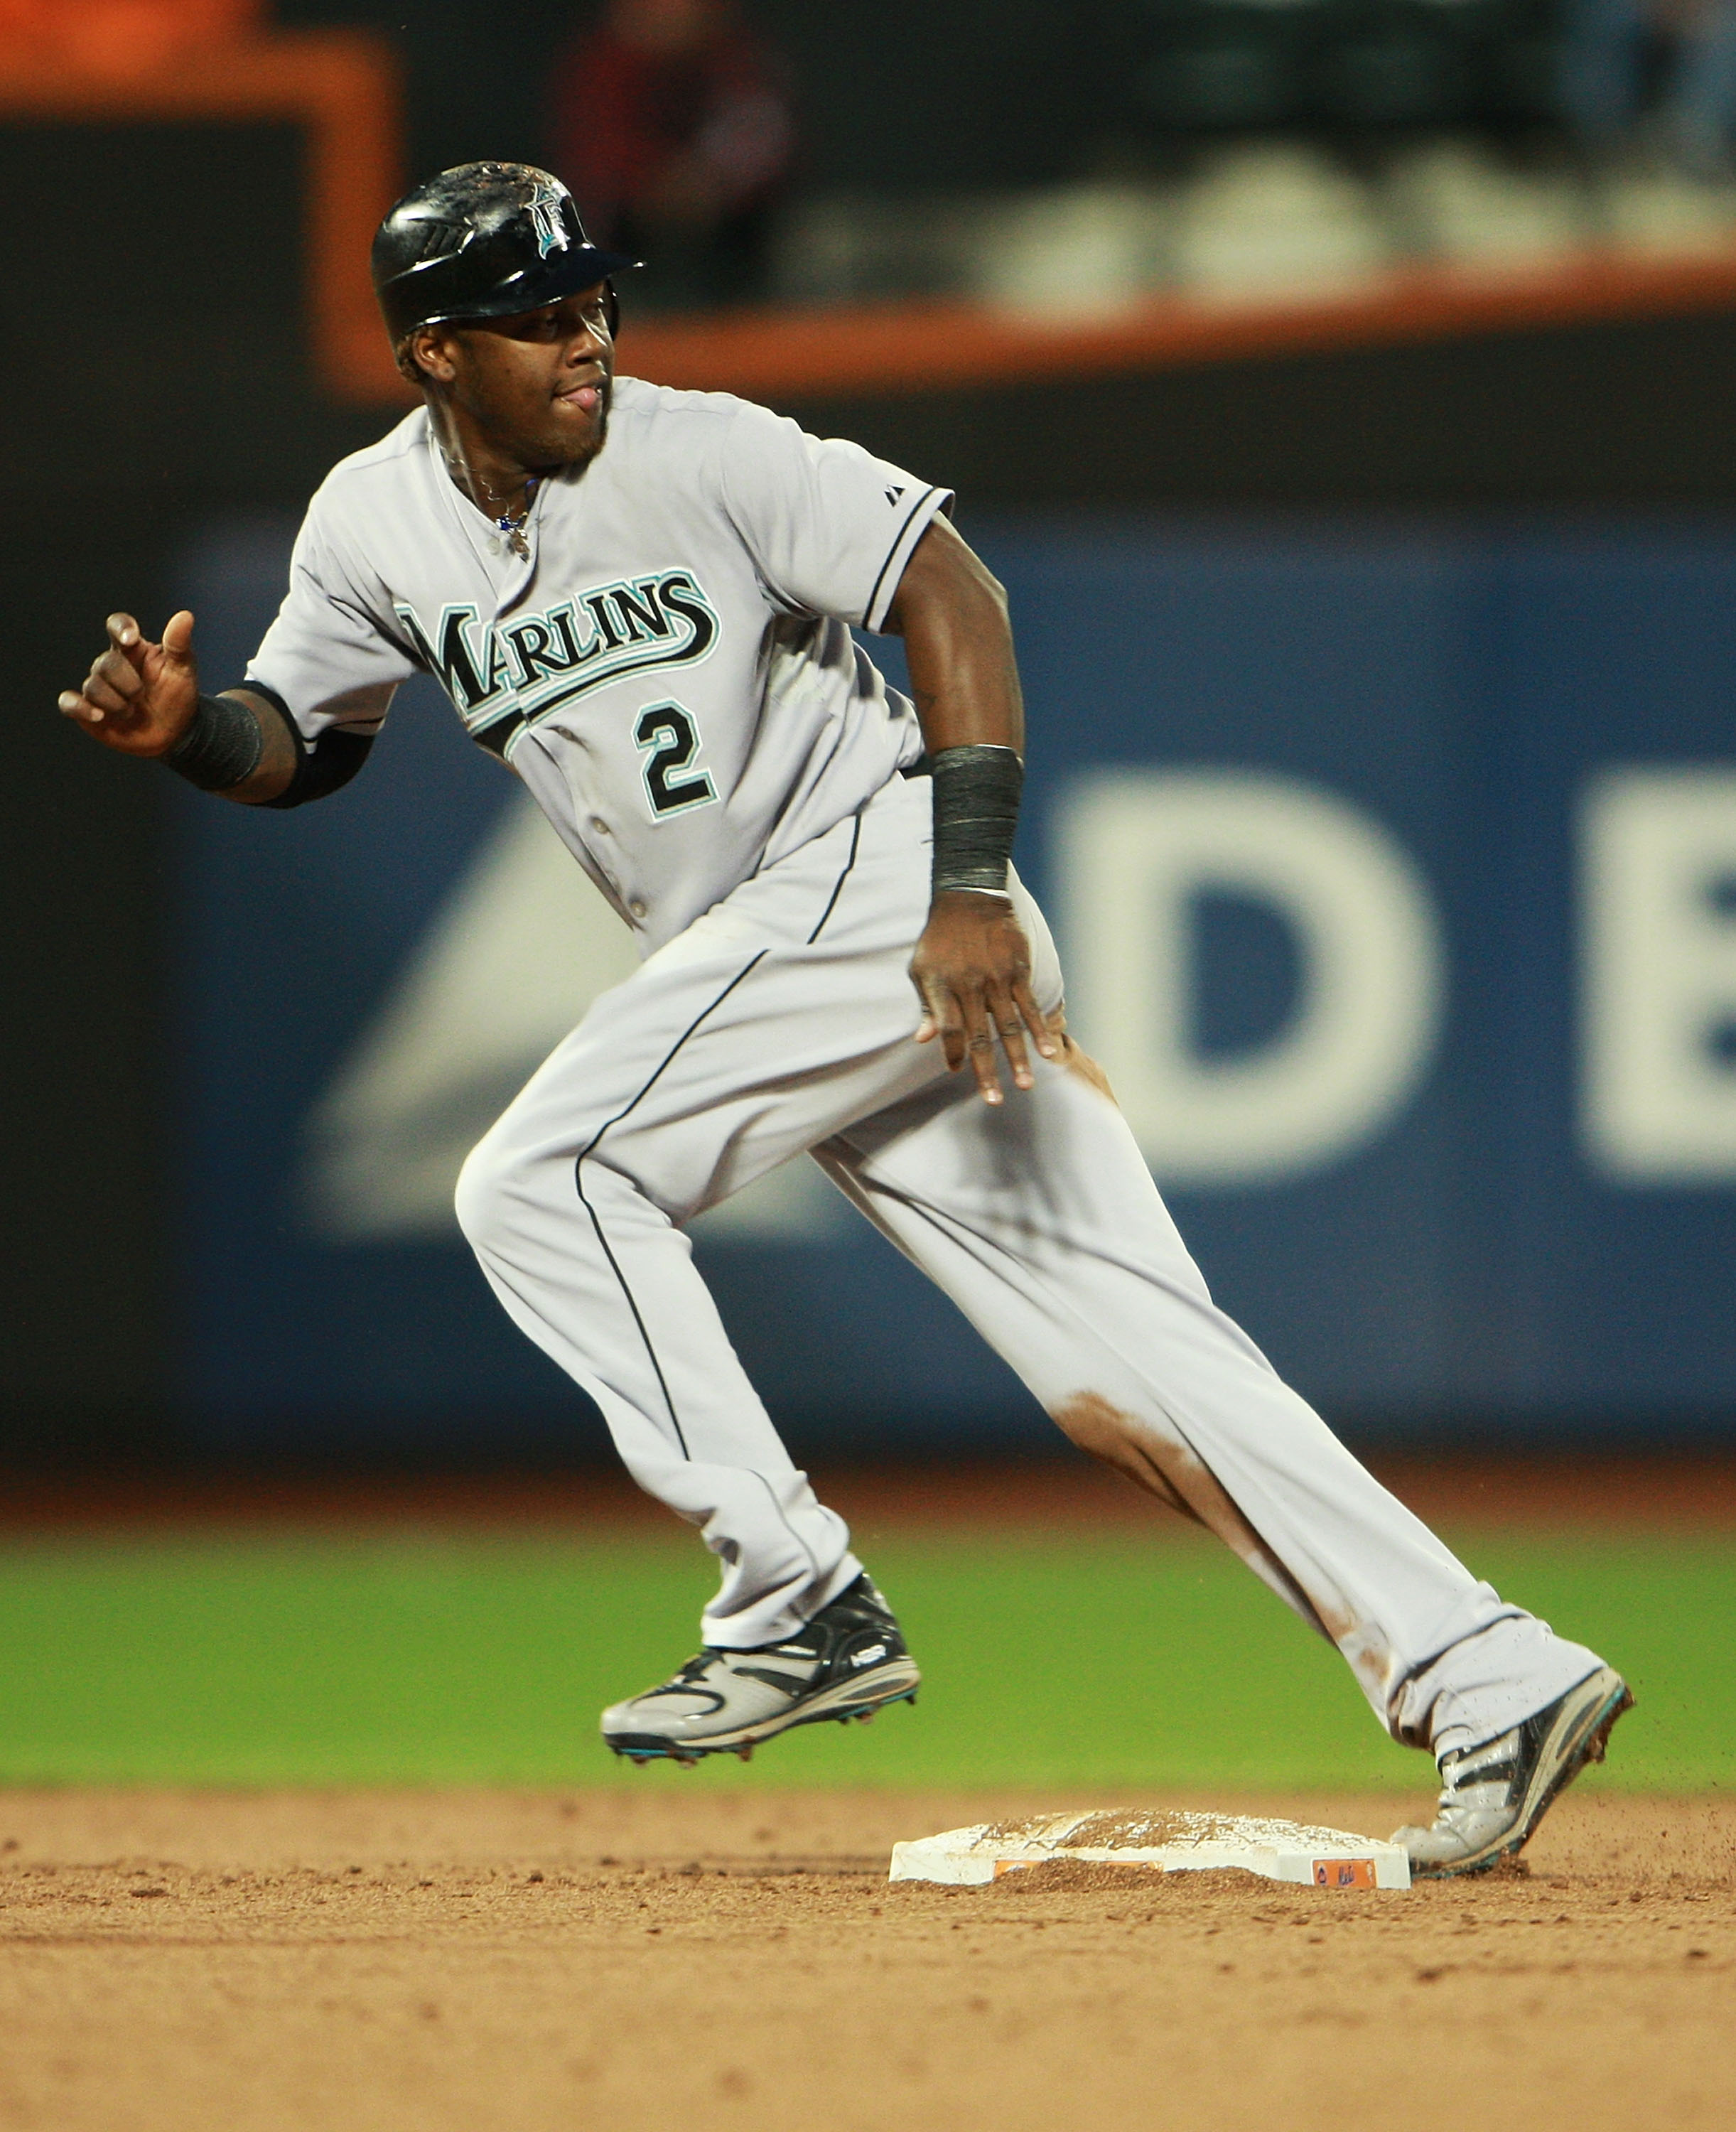 NEW YORK - AUGUST 25:  Hanley Ramirez #2 of the Florida Marlins watches the ball as he successfully steals second and third base in the third inning on August 25, 2010 at Citi Field in the Flushing neighborhood of the Queens borough of New York City.  (Ph